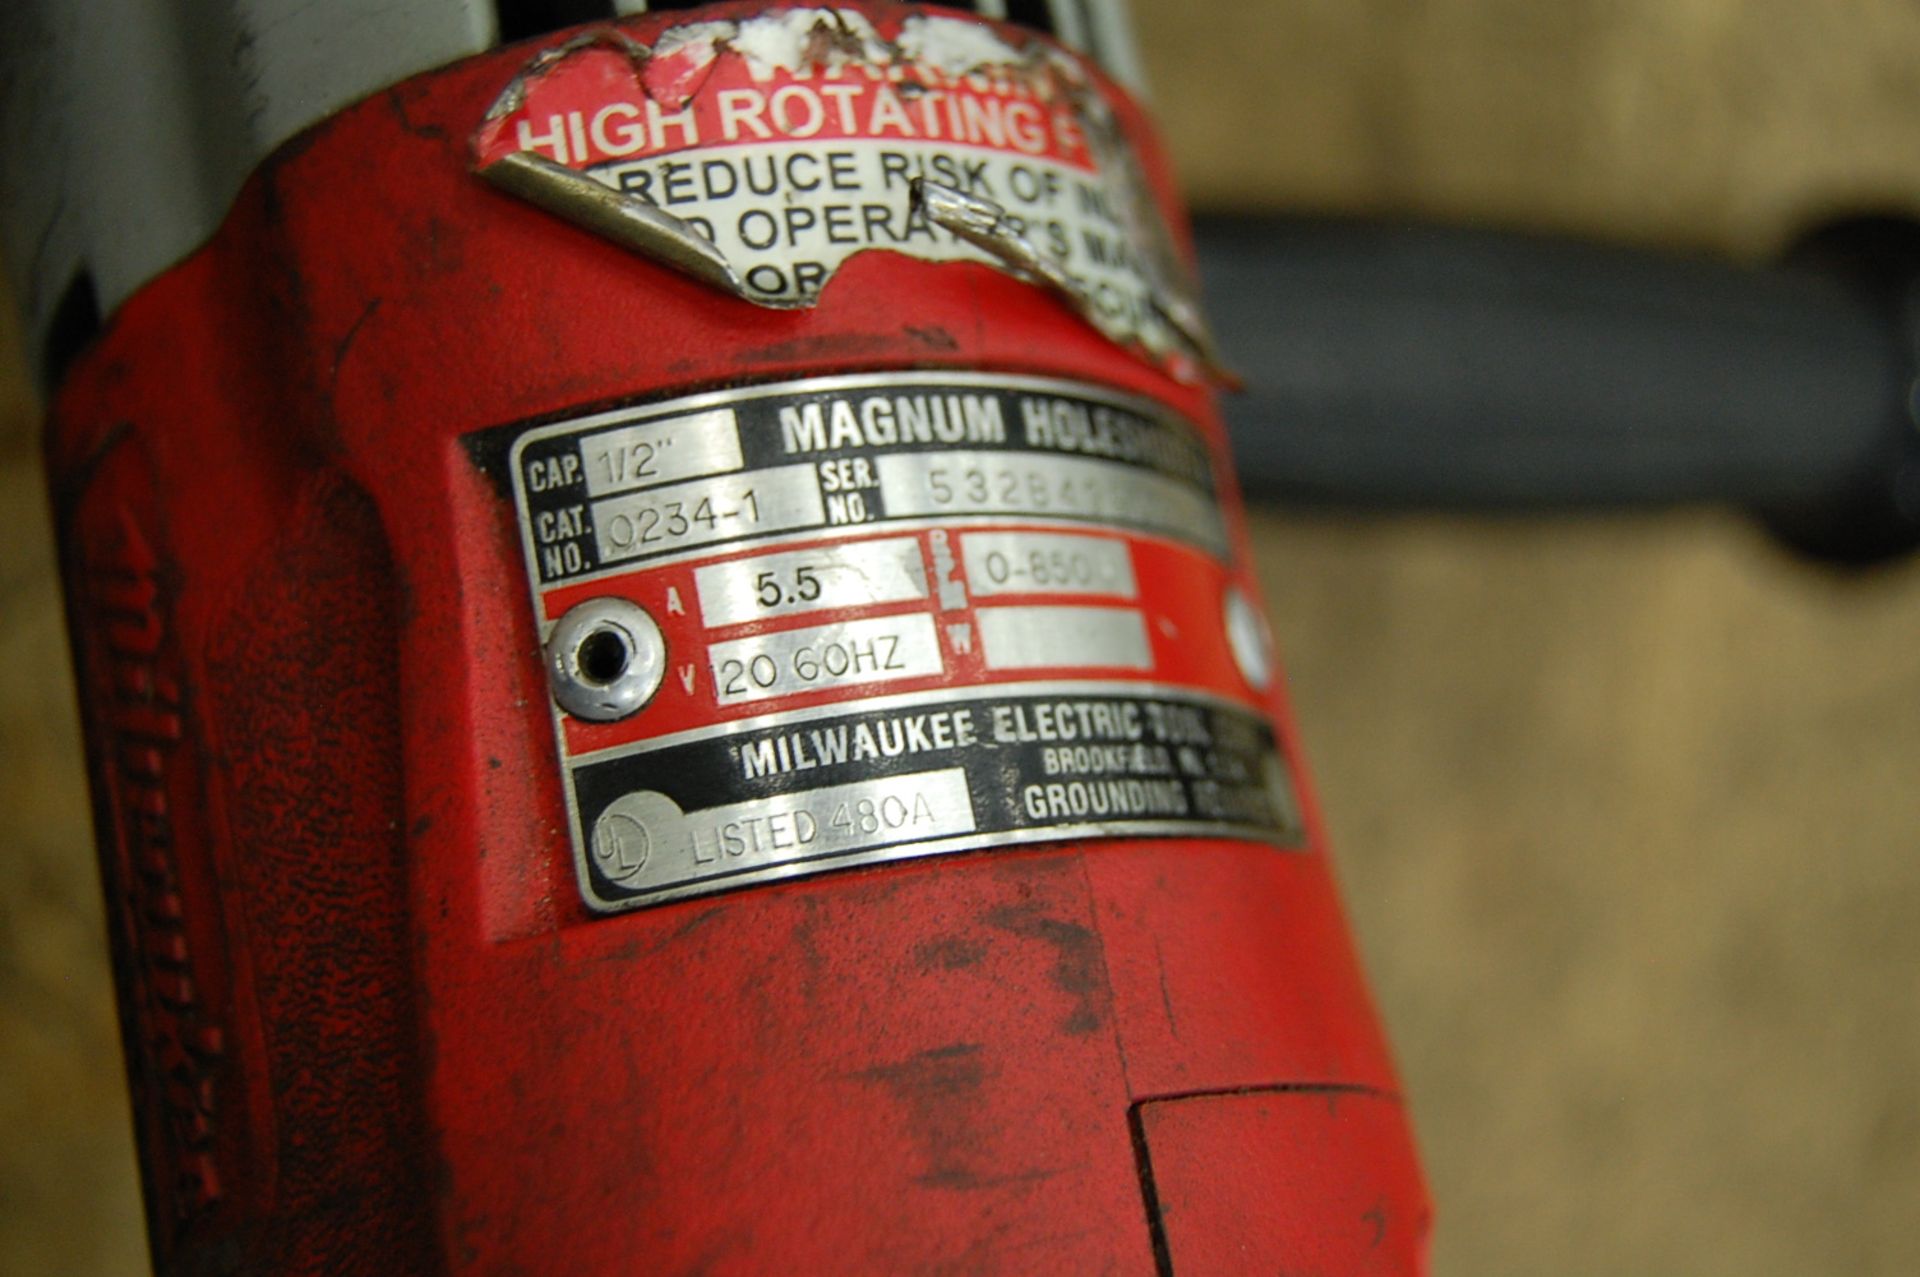 Milwaukee 1/2" Magnum Hole Shooter Electric Drill - Image 6 of 6